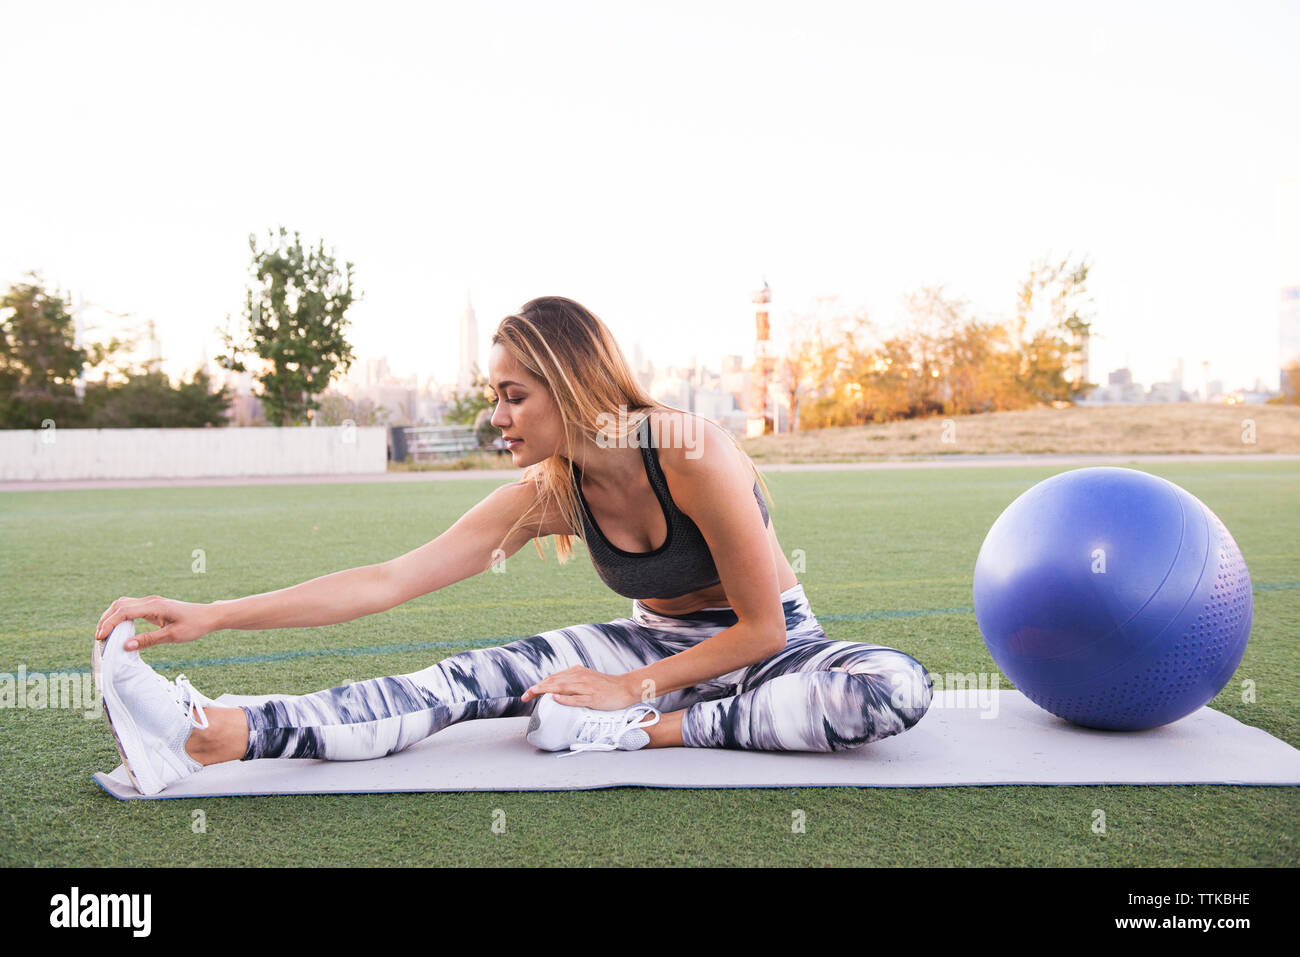 Full length of young woman stretching while sitting on exercise mat by fitness ball against clear sky at park Stock Photo